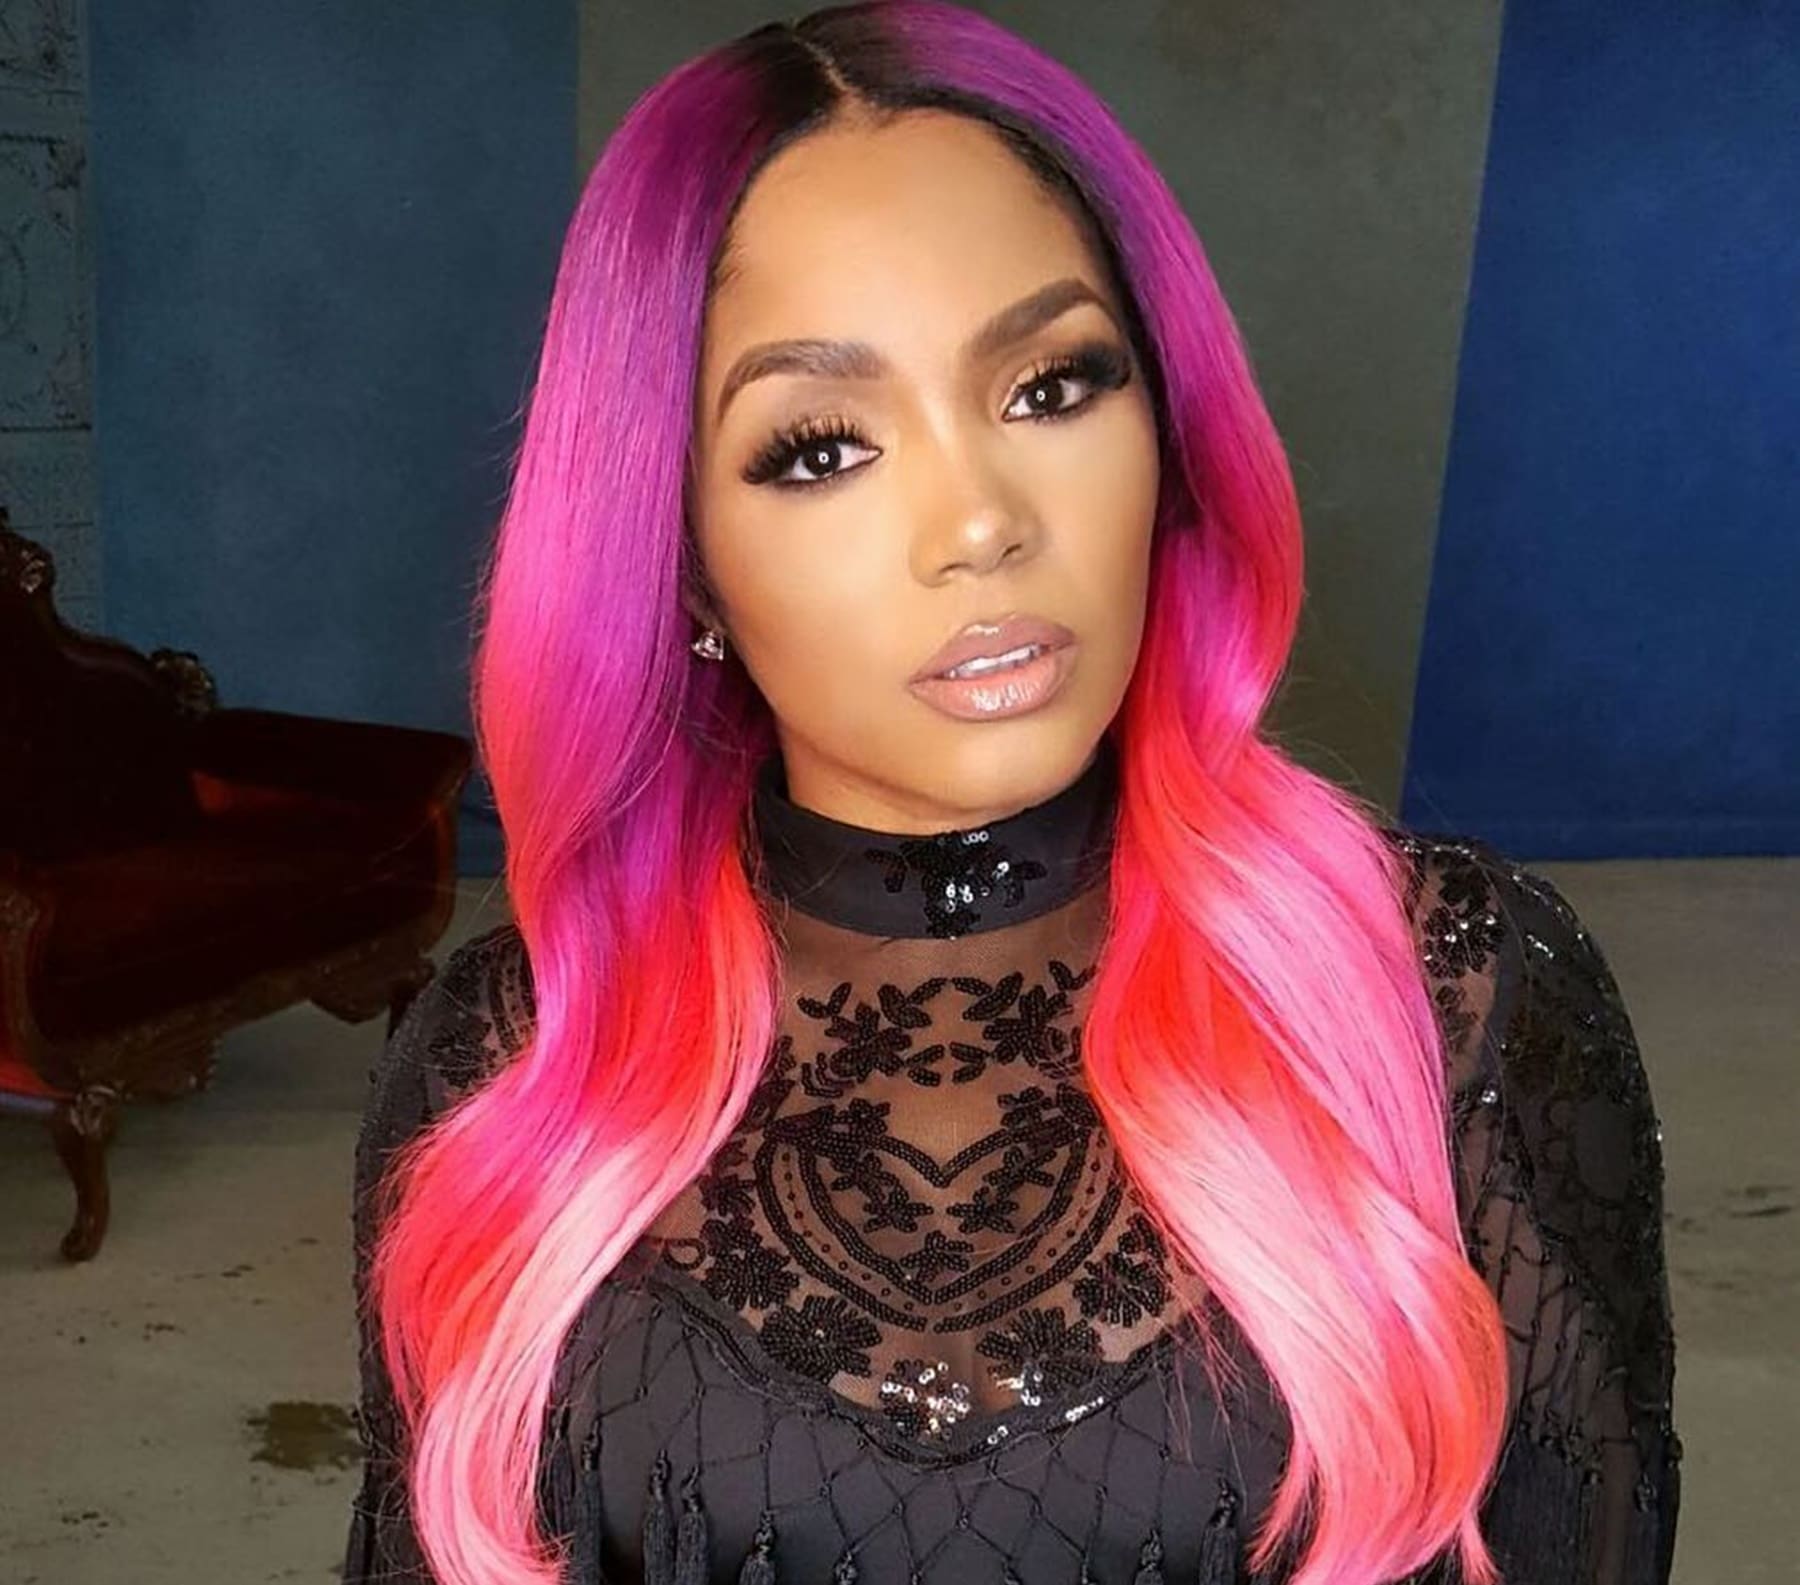 Rasheeda Frost's Fans Praise Her Style And Grace - See This Video